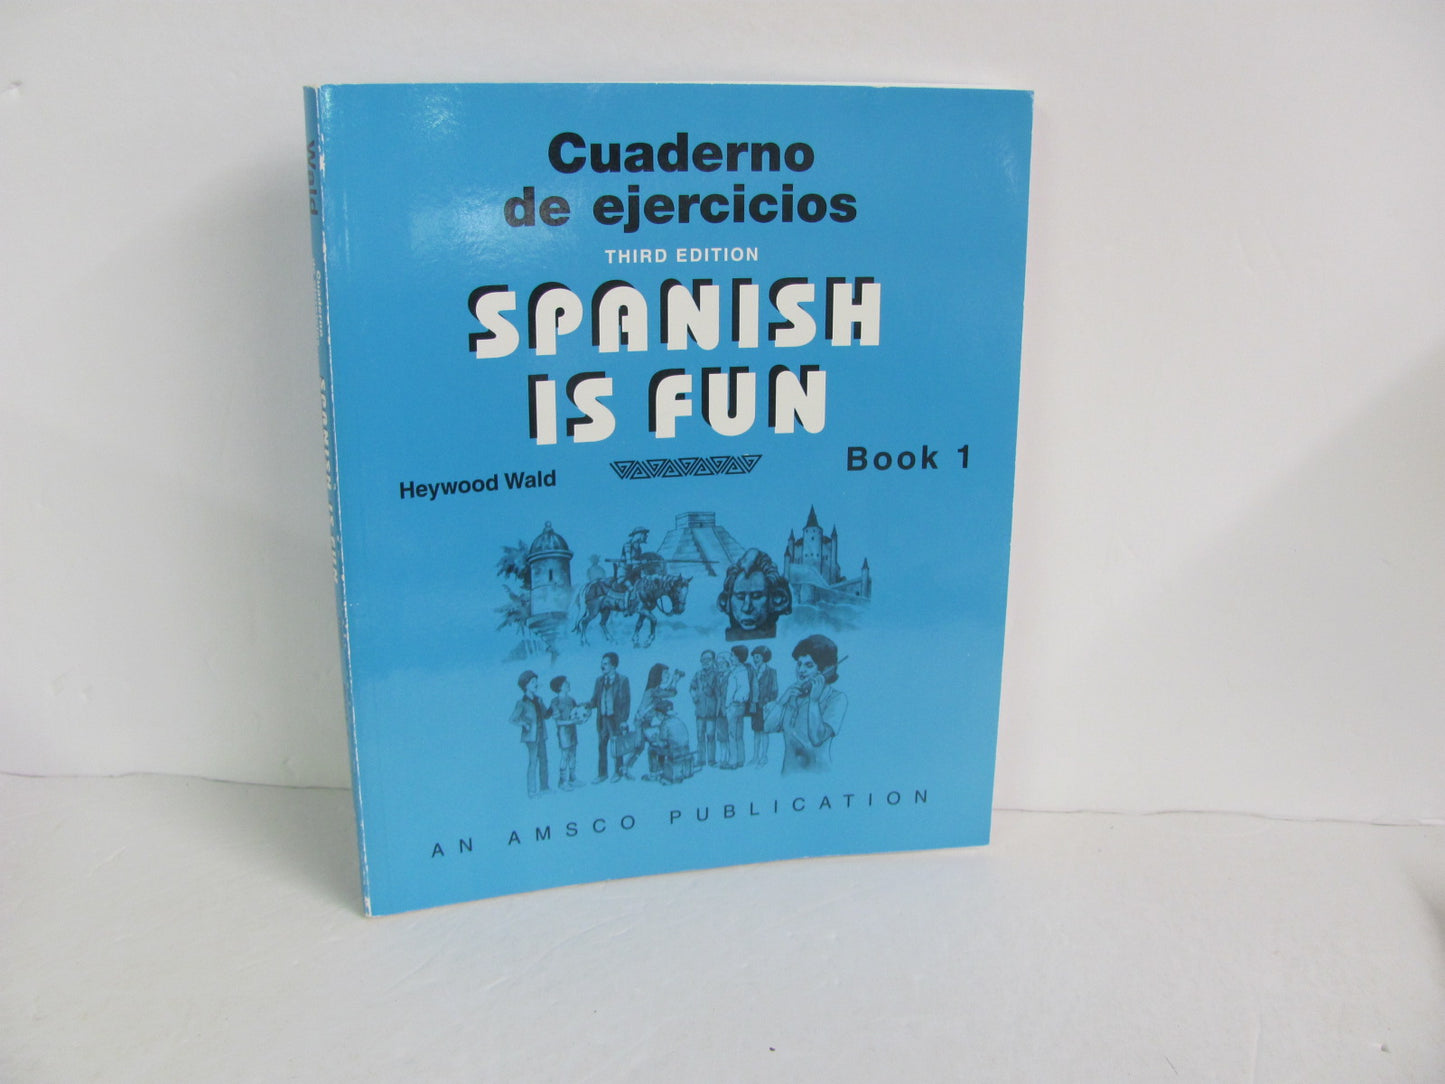 Spanish is Fun Amsco Student Book Pre-Owned Spanish Books